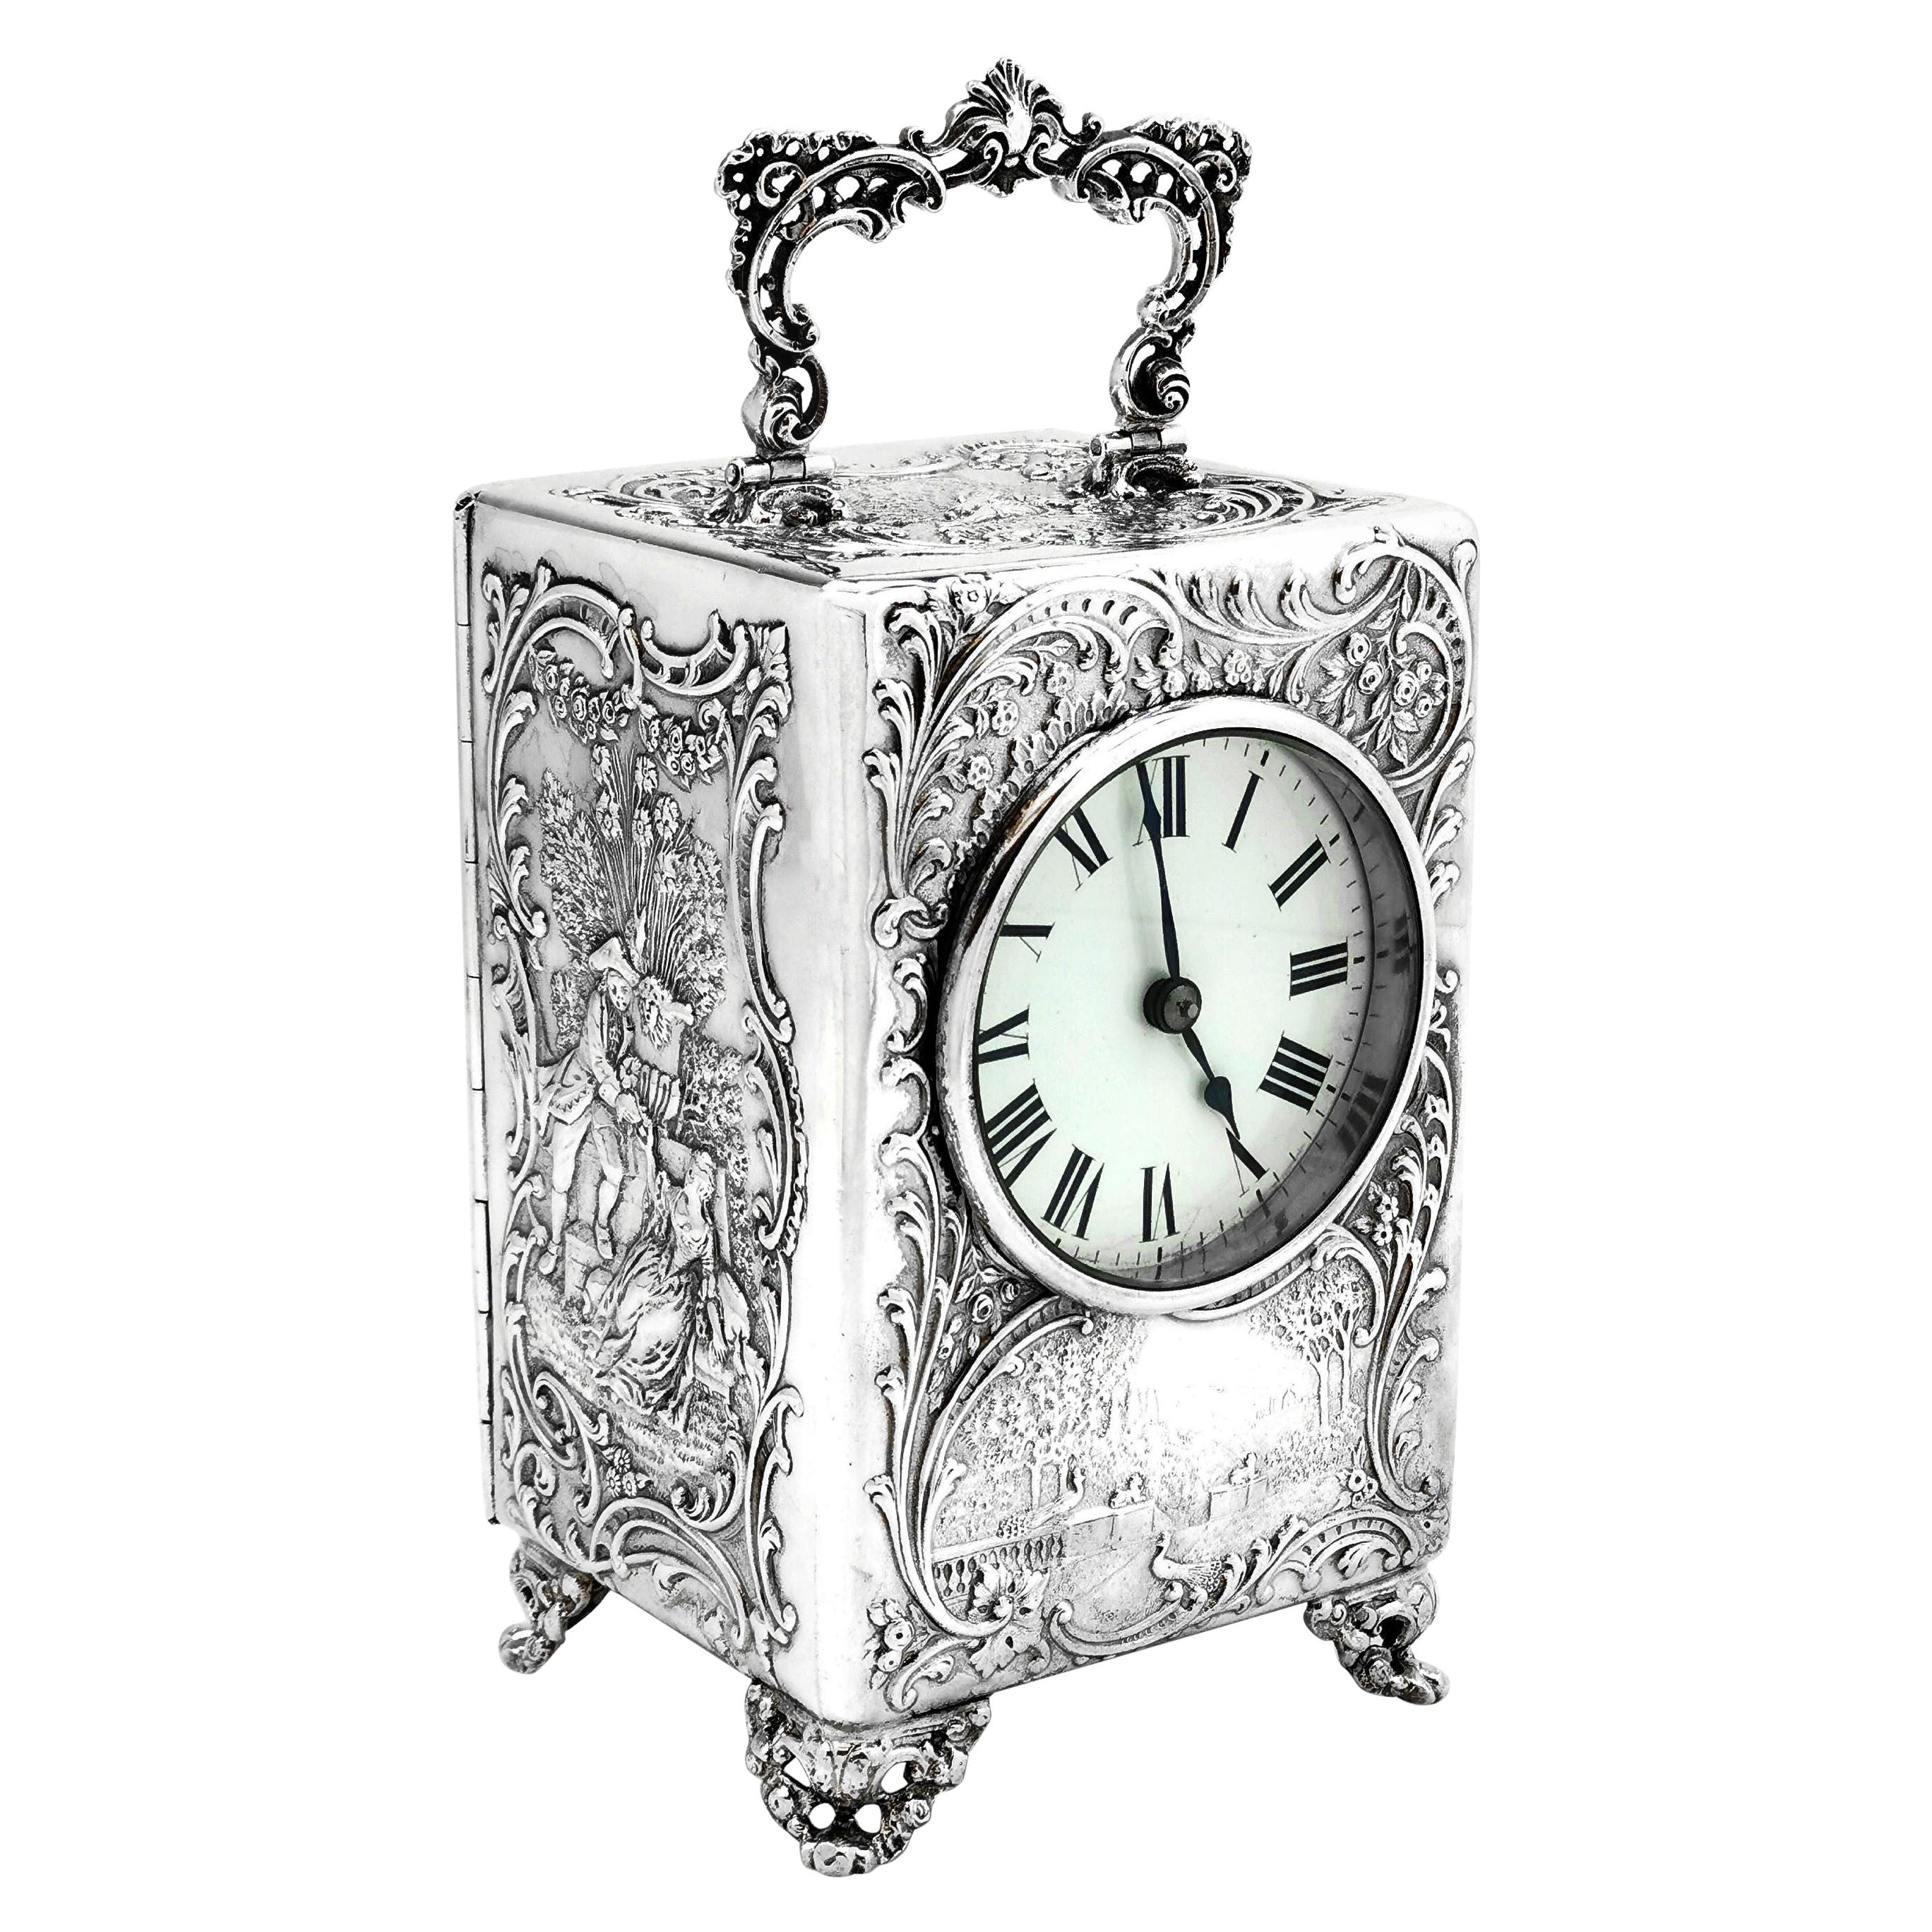 Antique Victorian Sterling Silver Mantle Carriage Clock, 1899